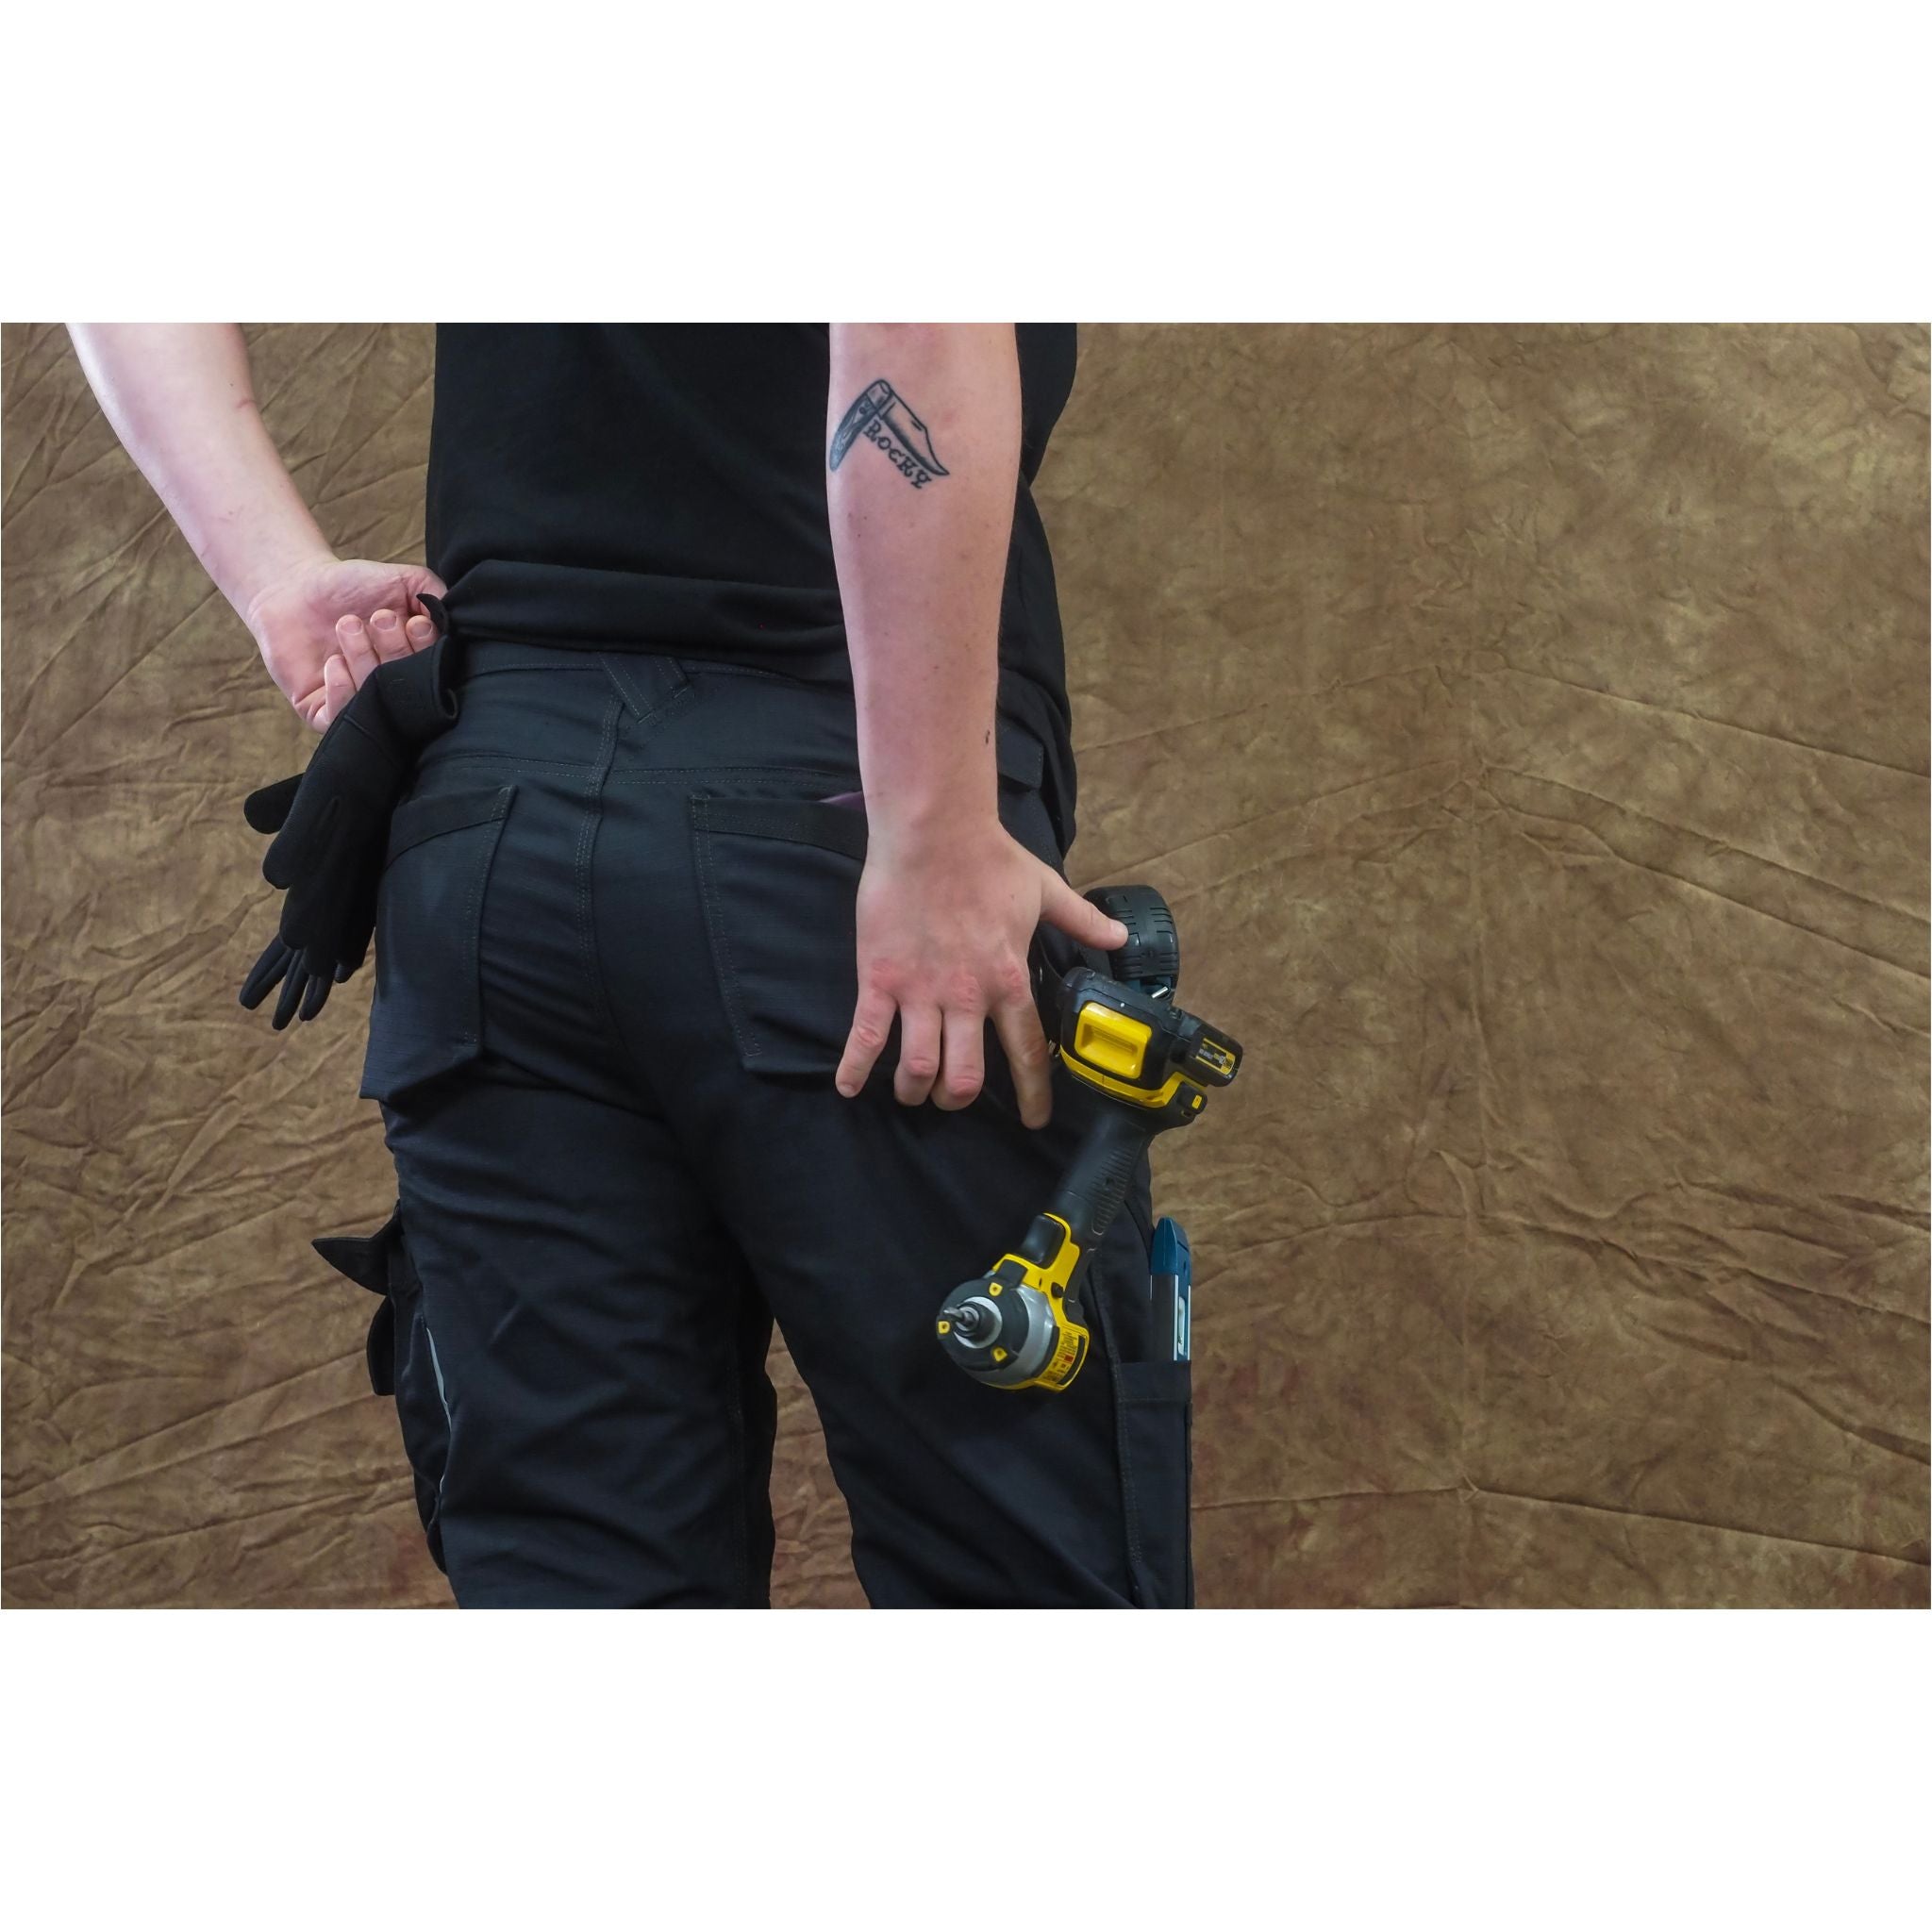 women's black work pants with tool loops and deep pockets